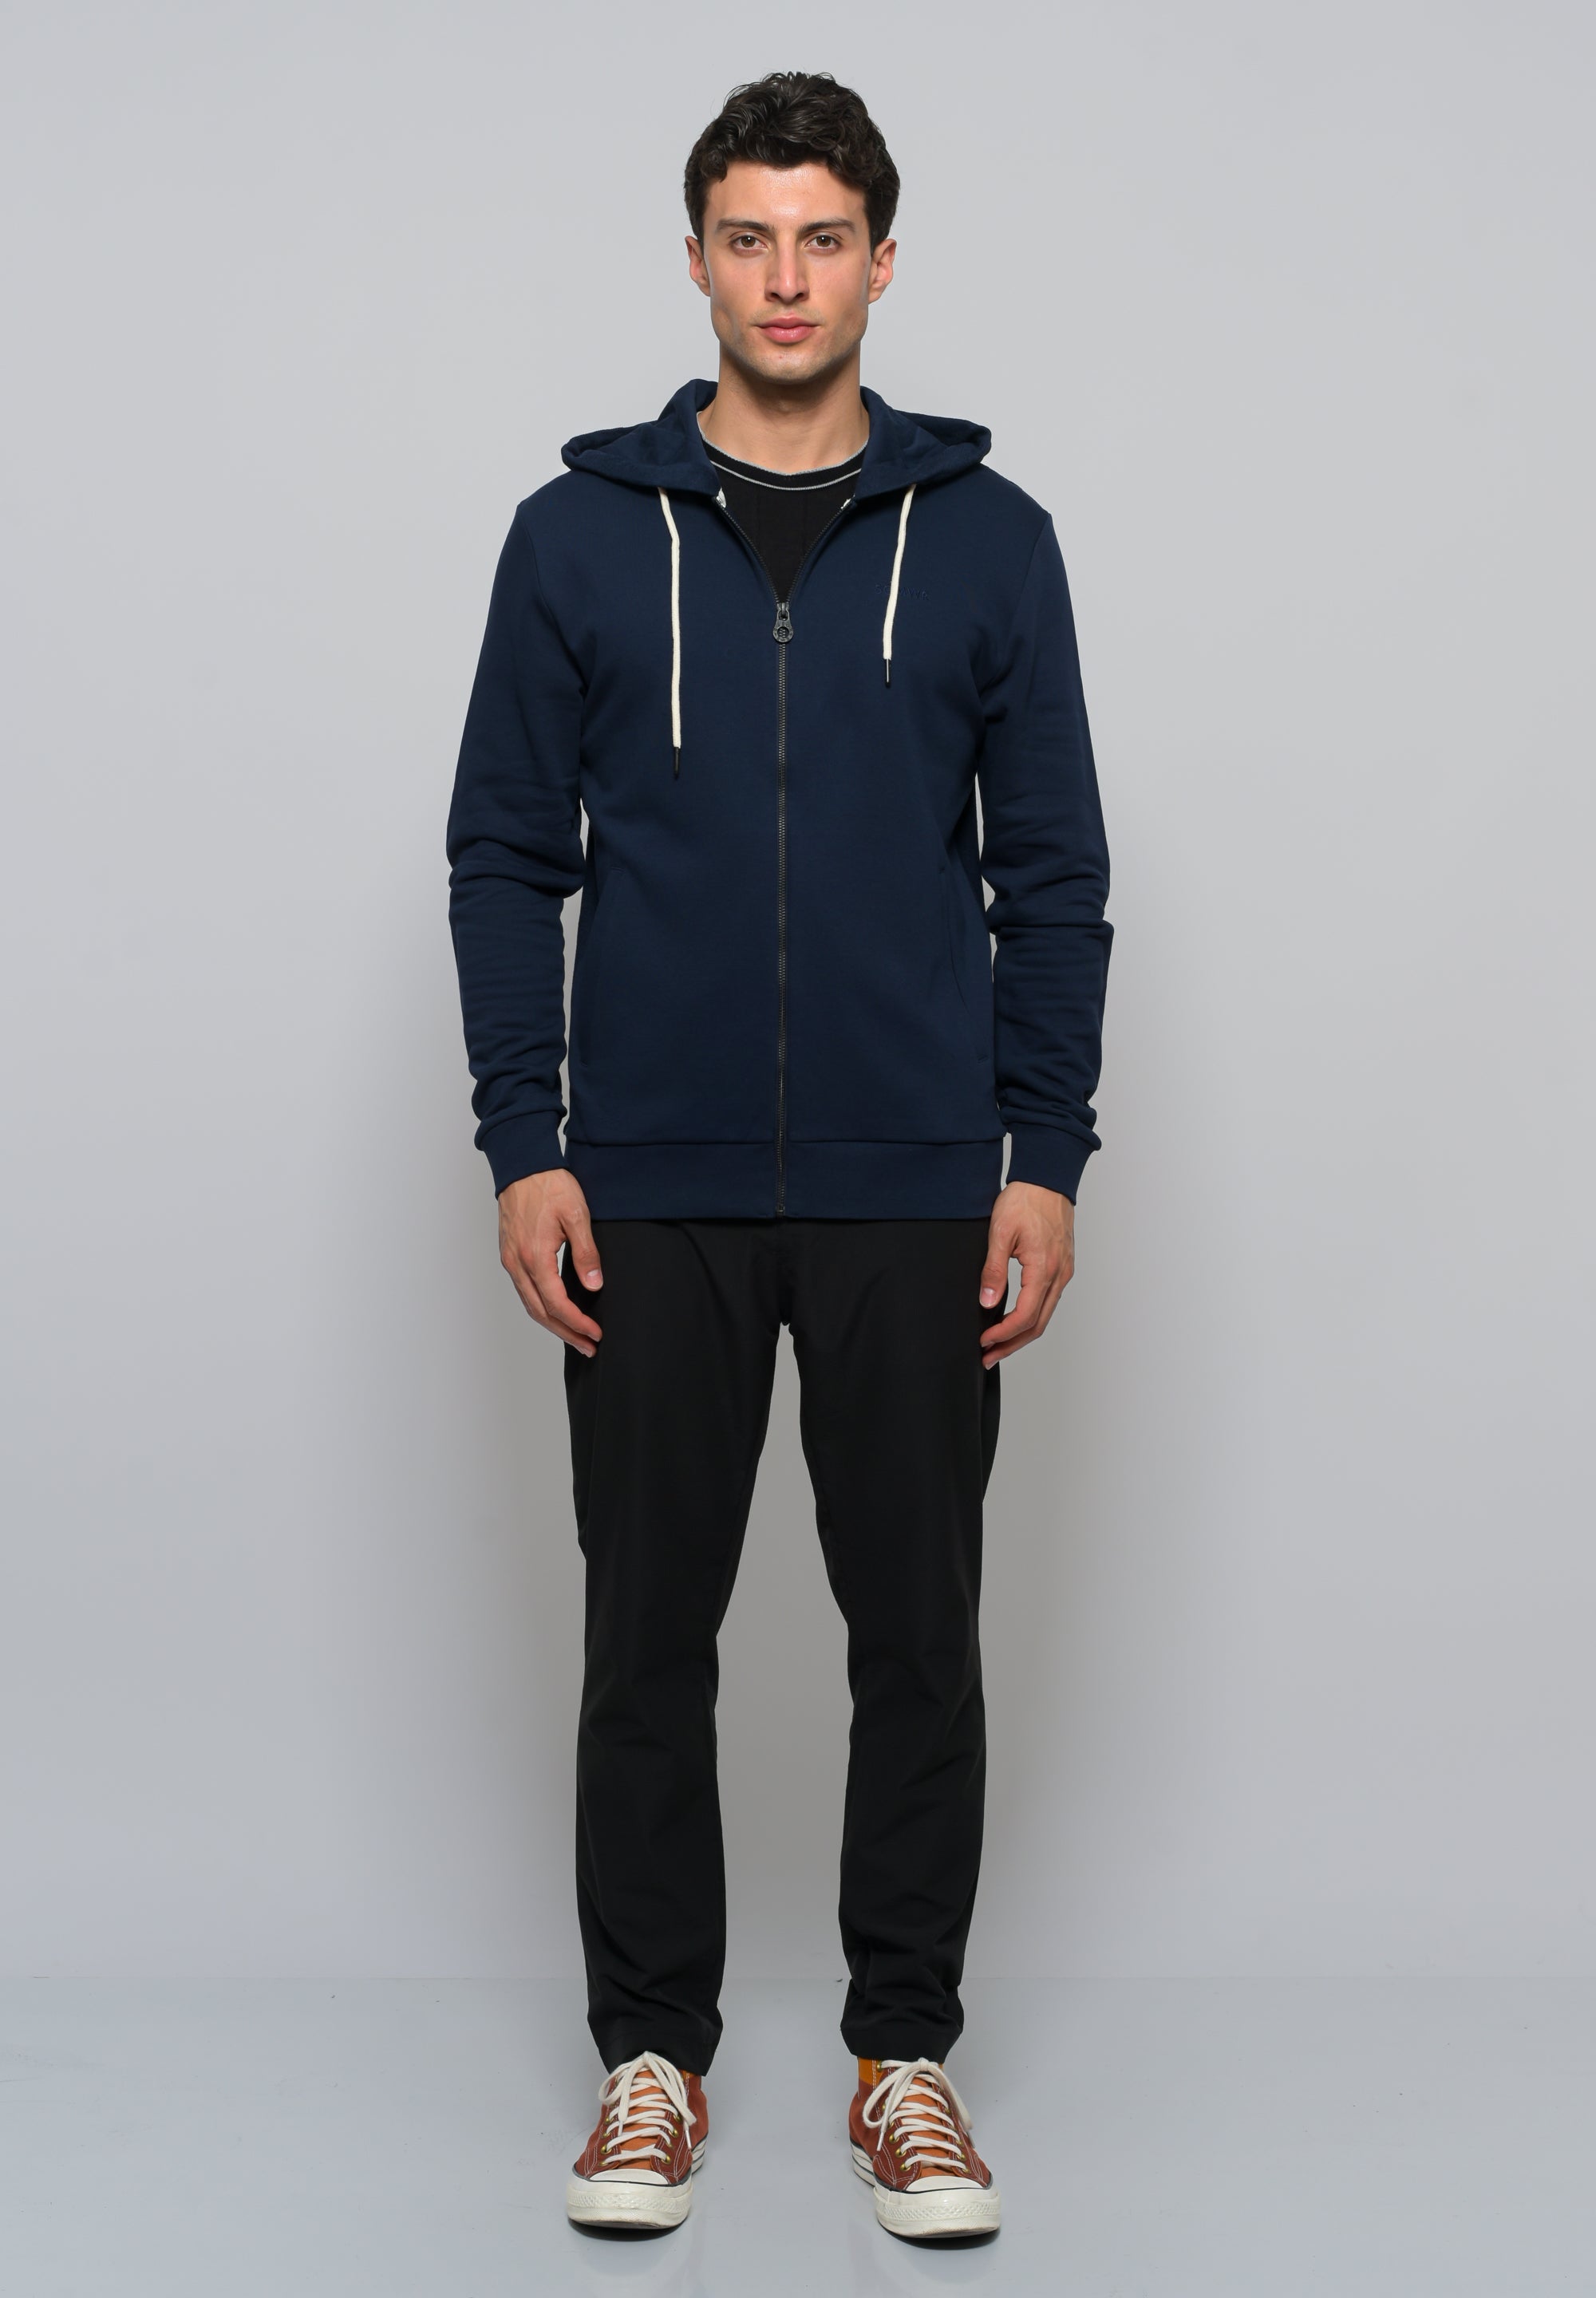 SOMWR VISIONARY ZIP UP Zip-Hoodie NVY012